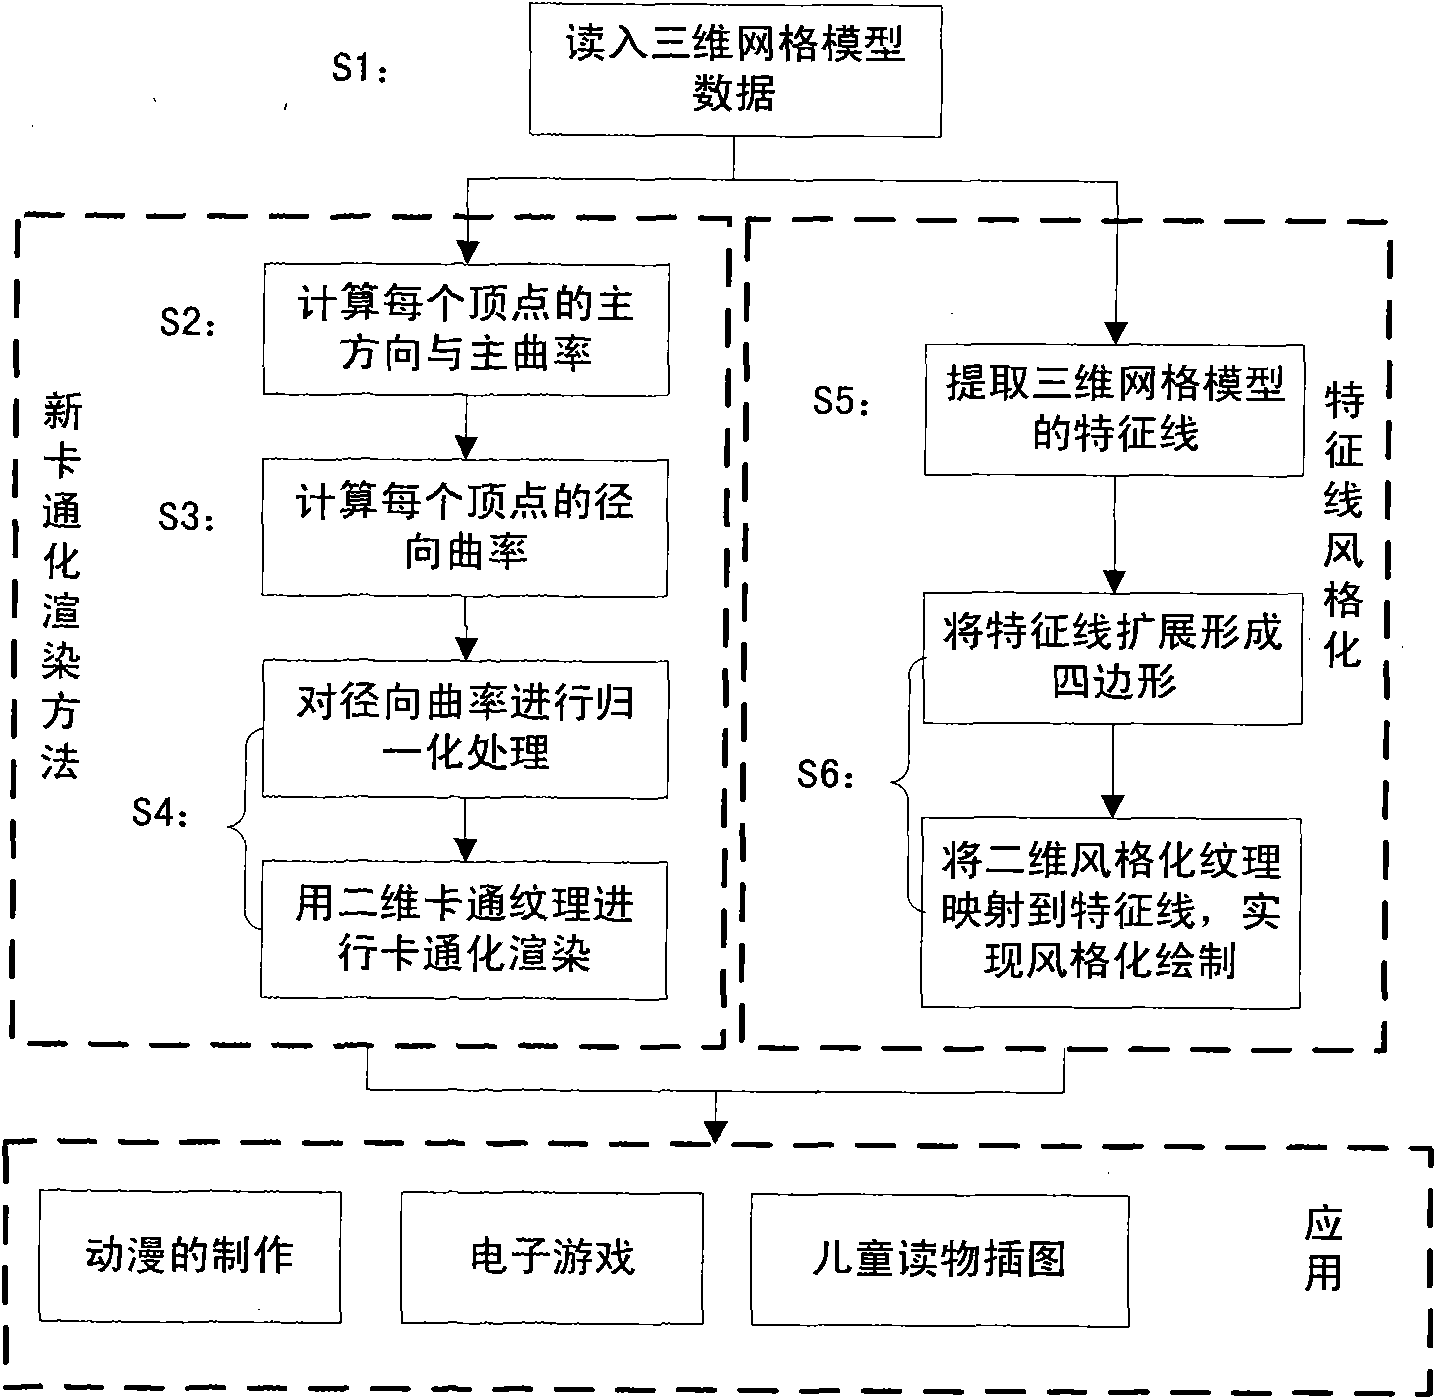 Non-photorealistic rendering method for three-dimensional network model with stylized typical lines